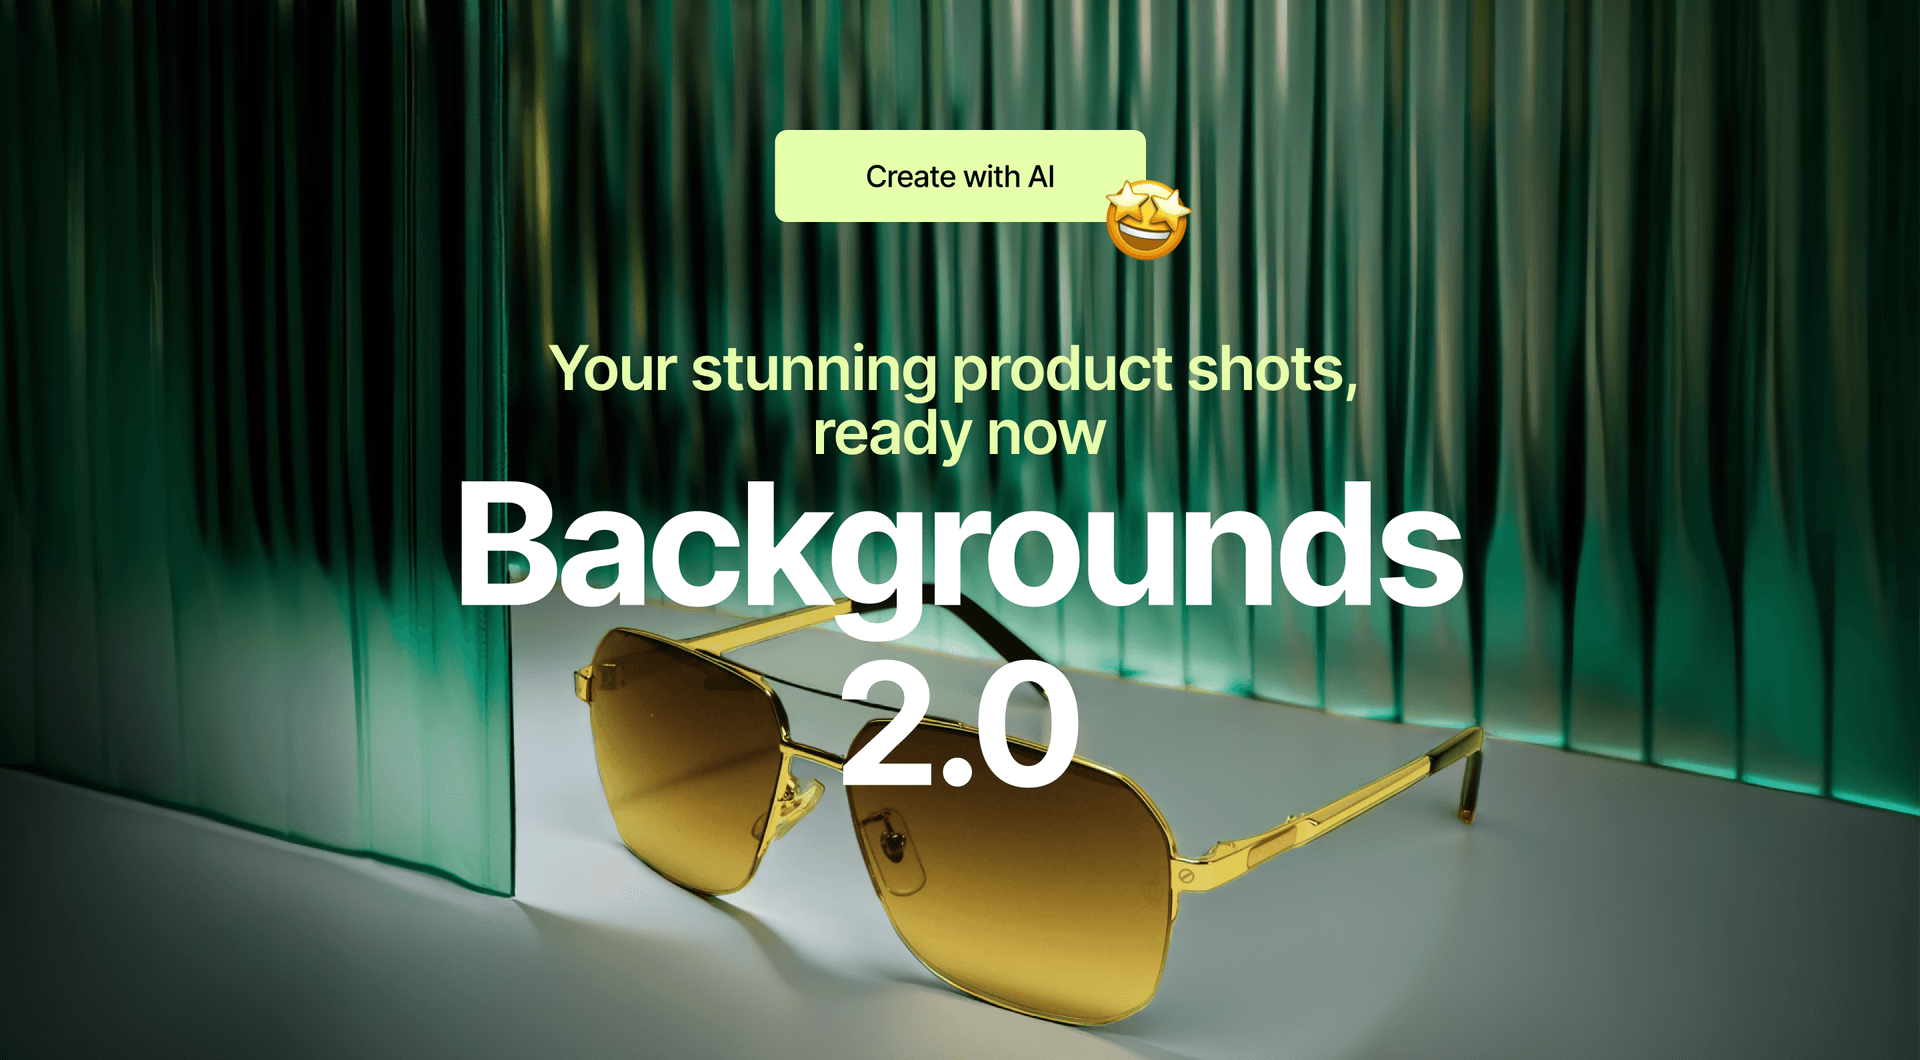 Picture for Backgrounds 2.0: Get studio-quality product shots in seconds article